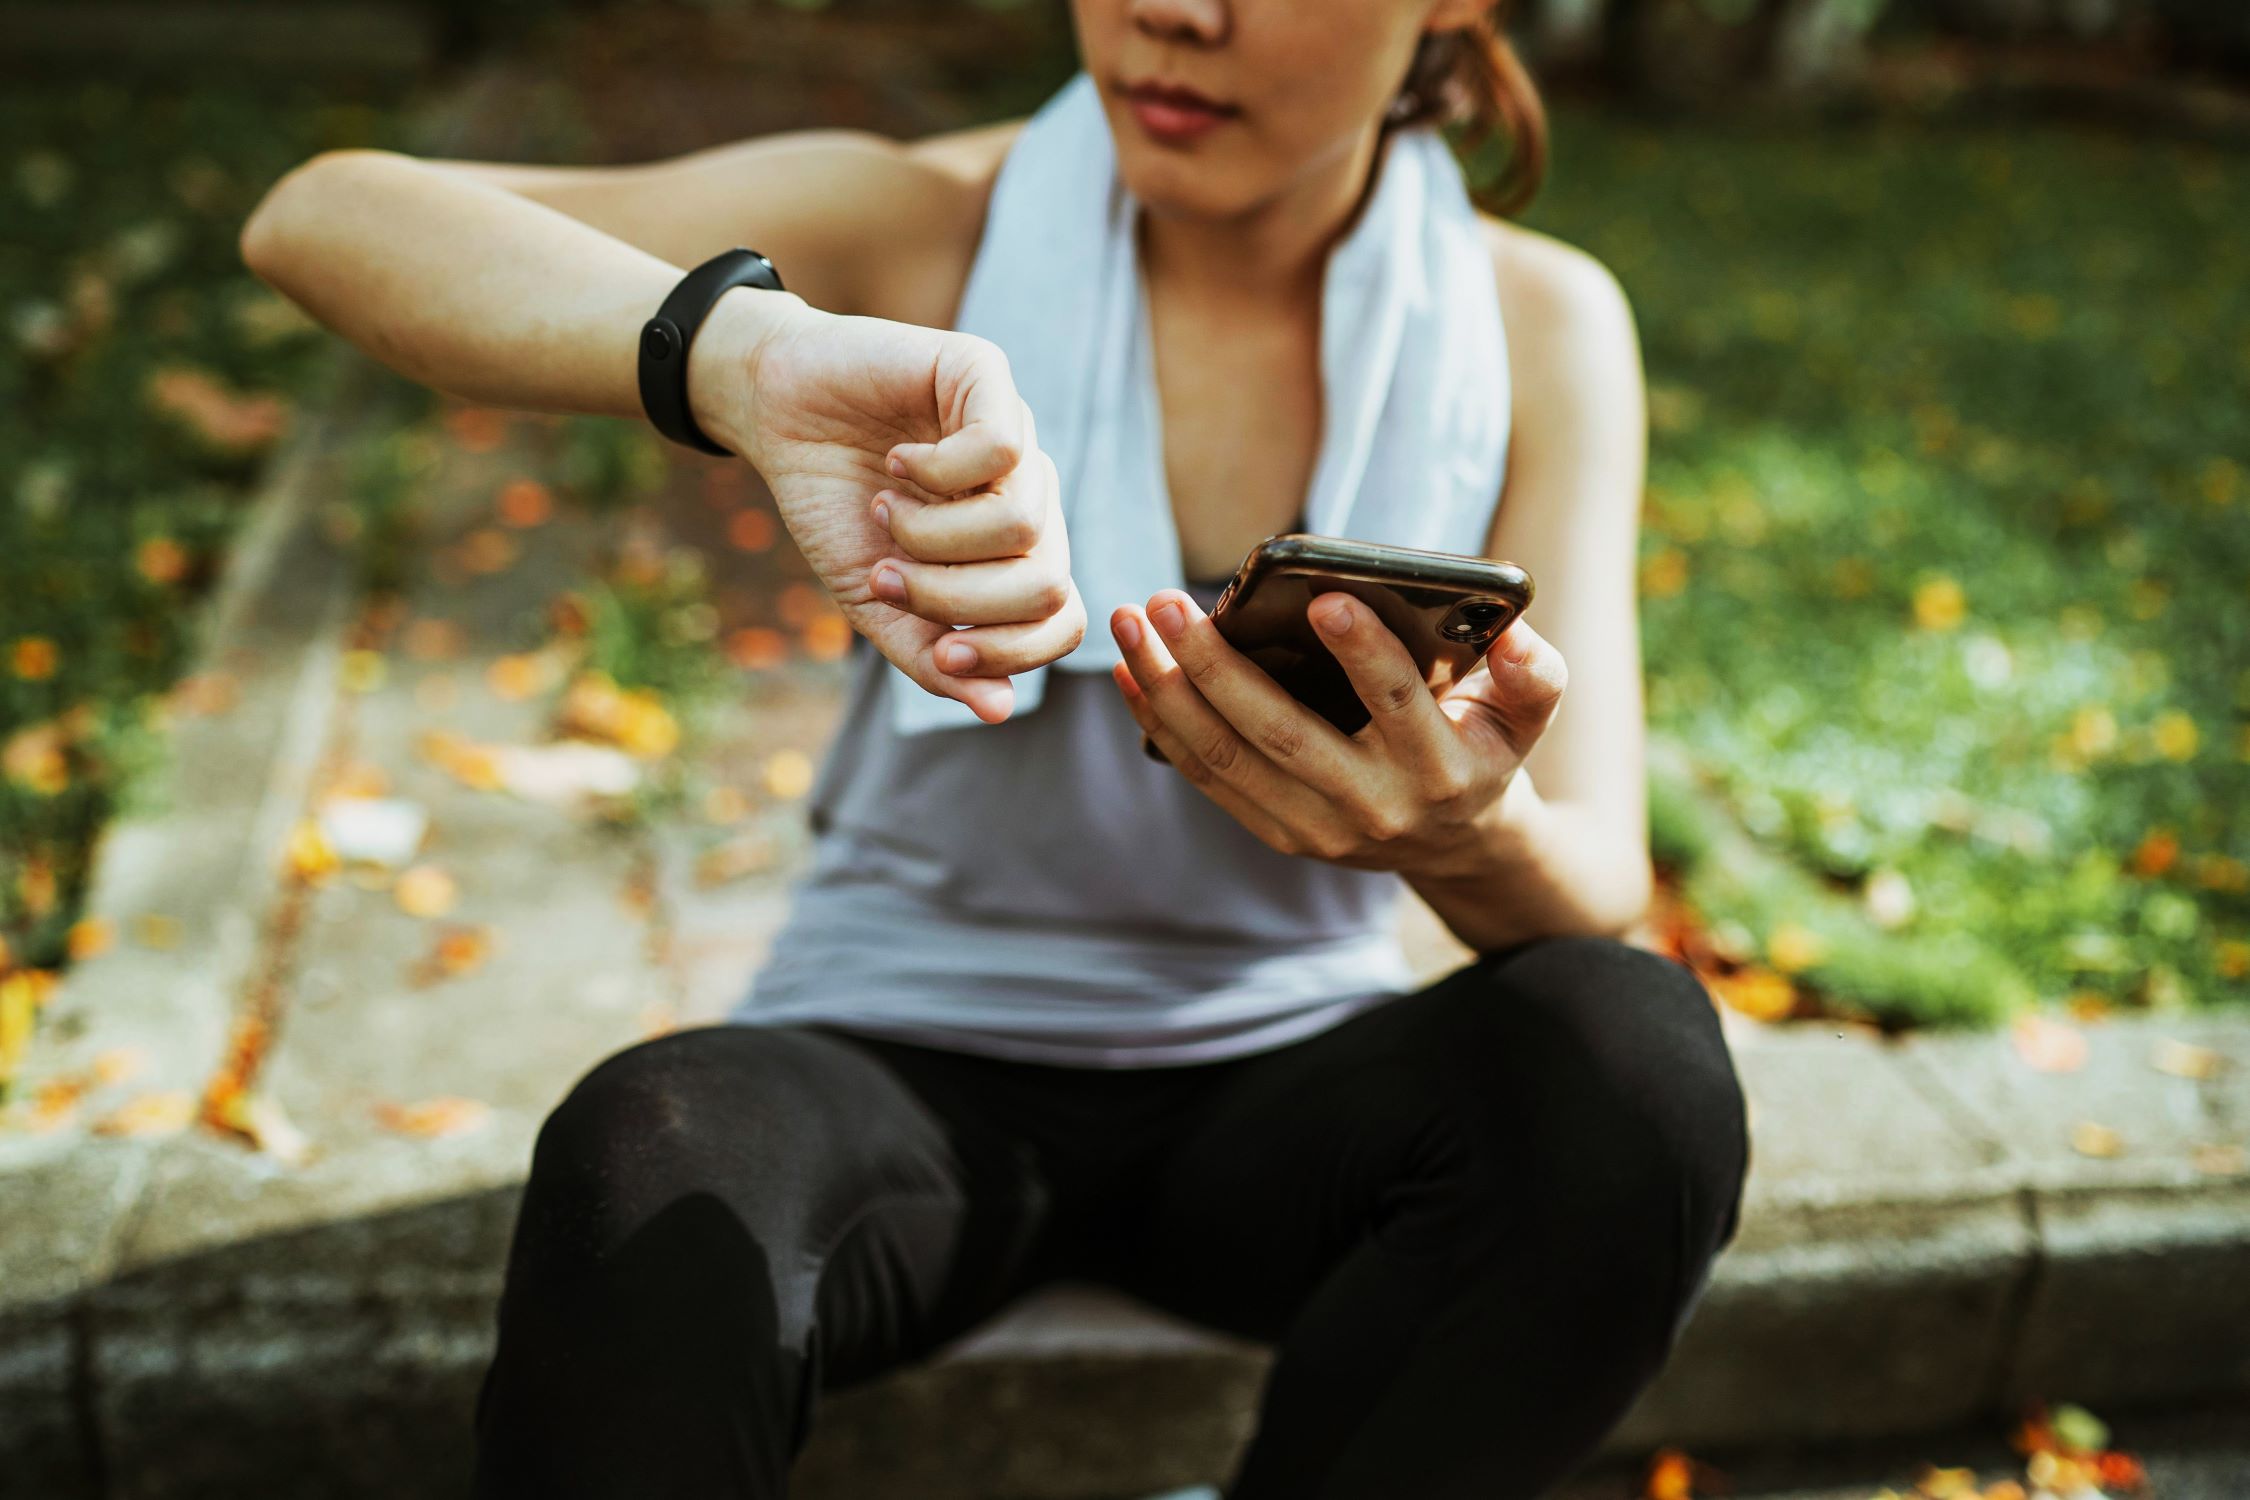 Top Fitness Apps In The UK: Peloton, Fiit, And Other Options Reviewed